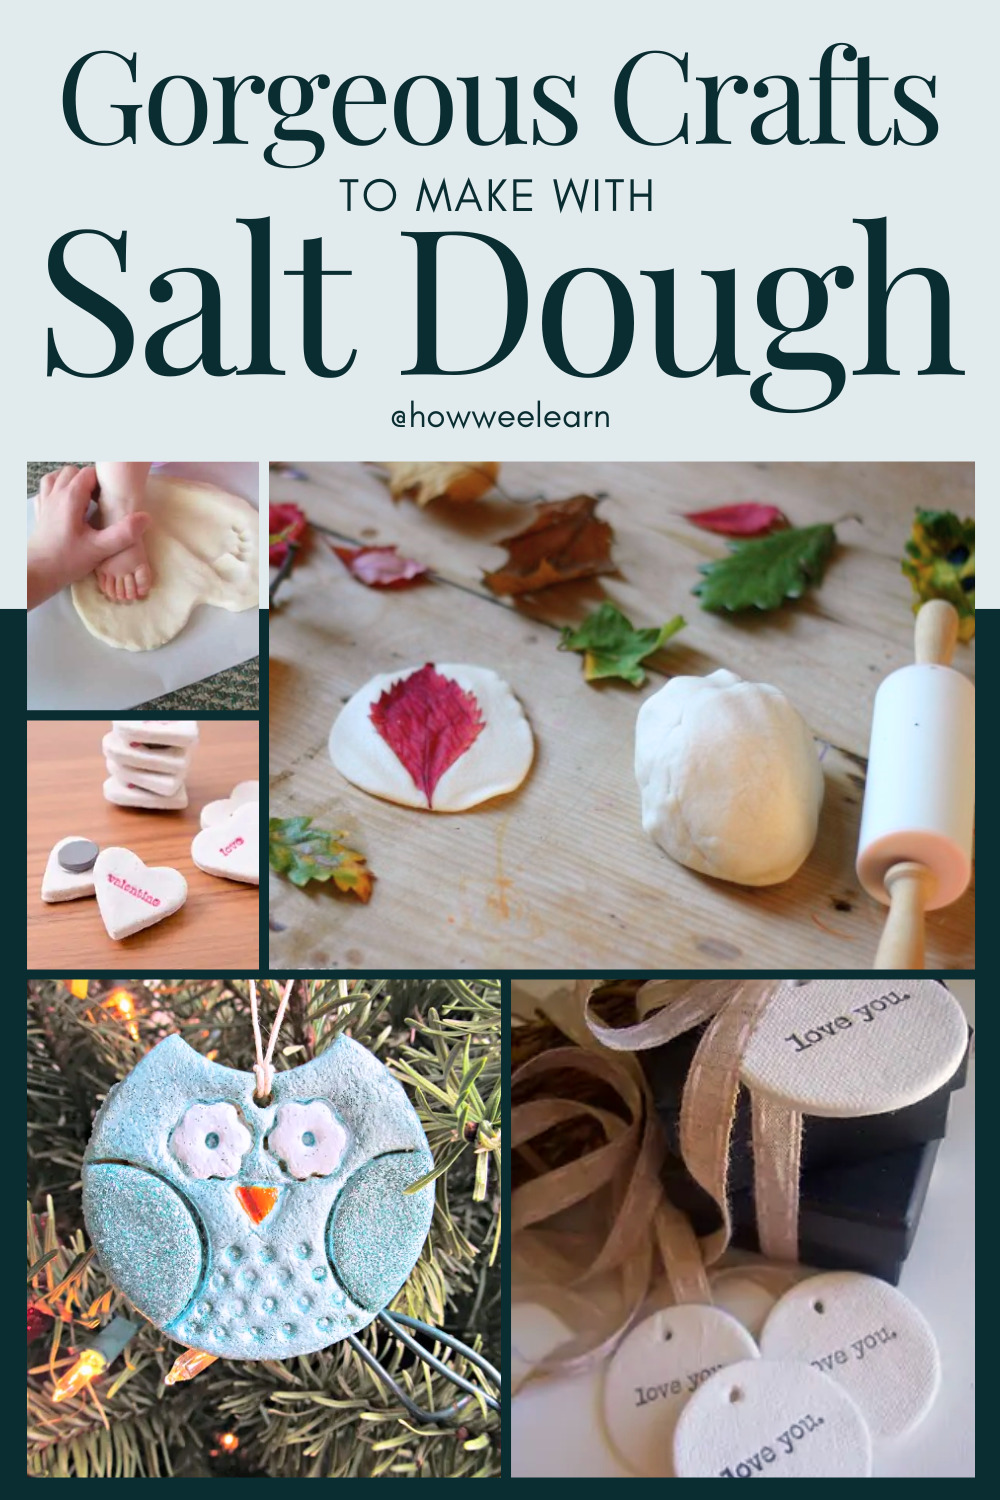 Gorgeous Crafts to Make with Salt Dough